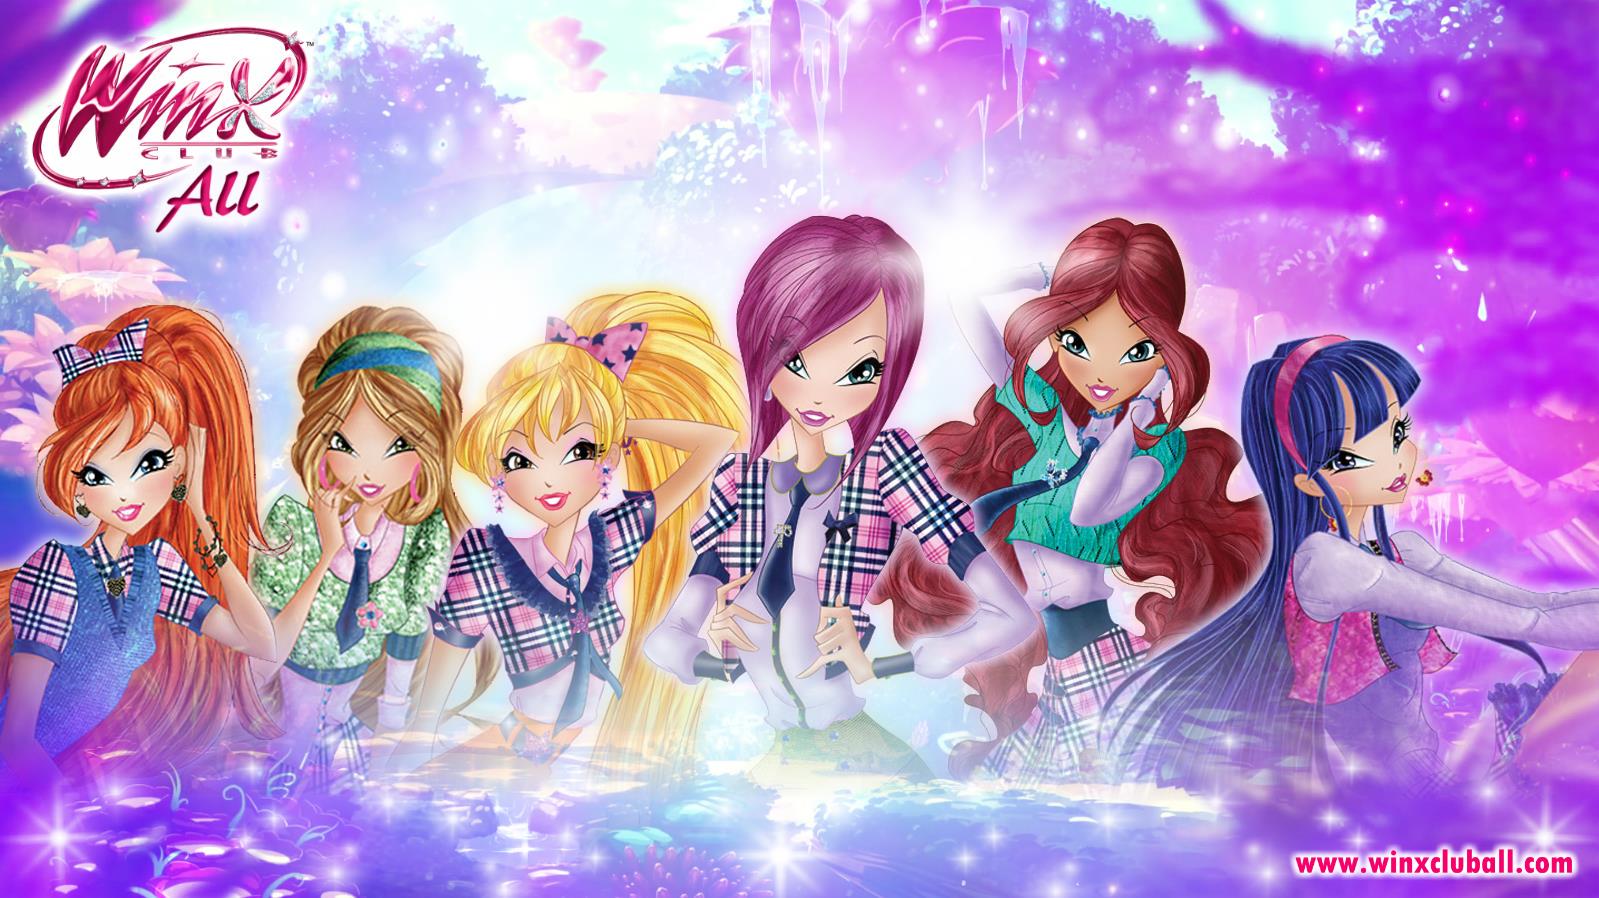 I have found my new phone wallpaper Credit DT  rwinxclub